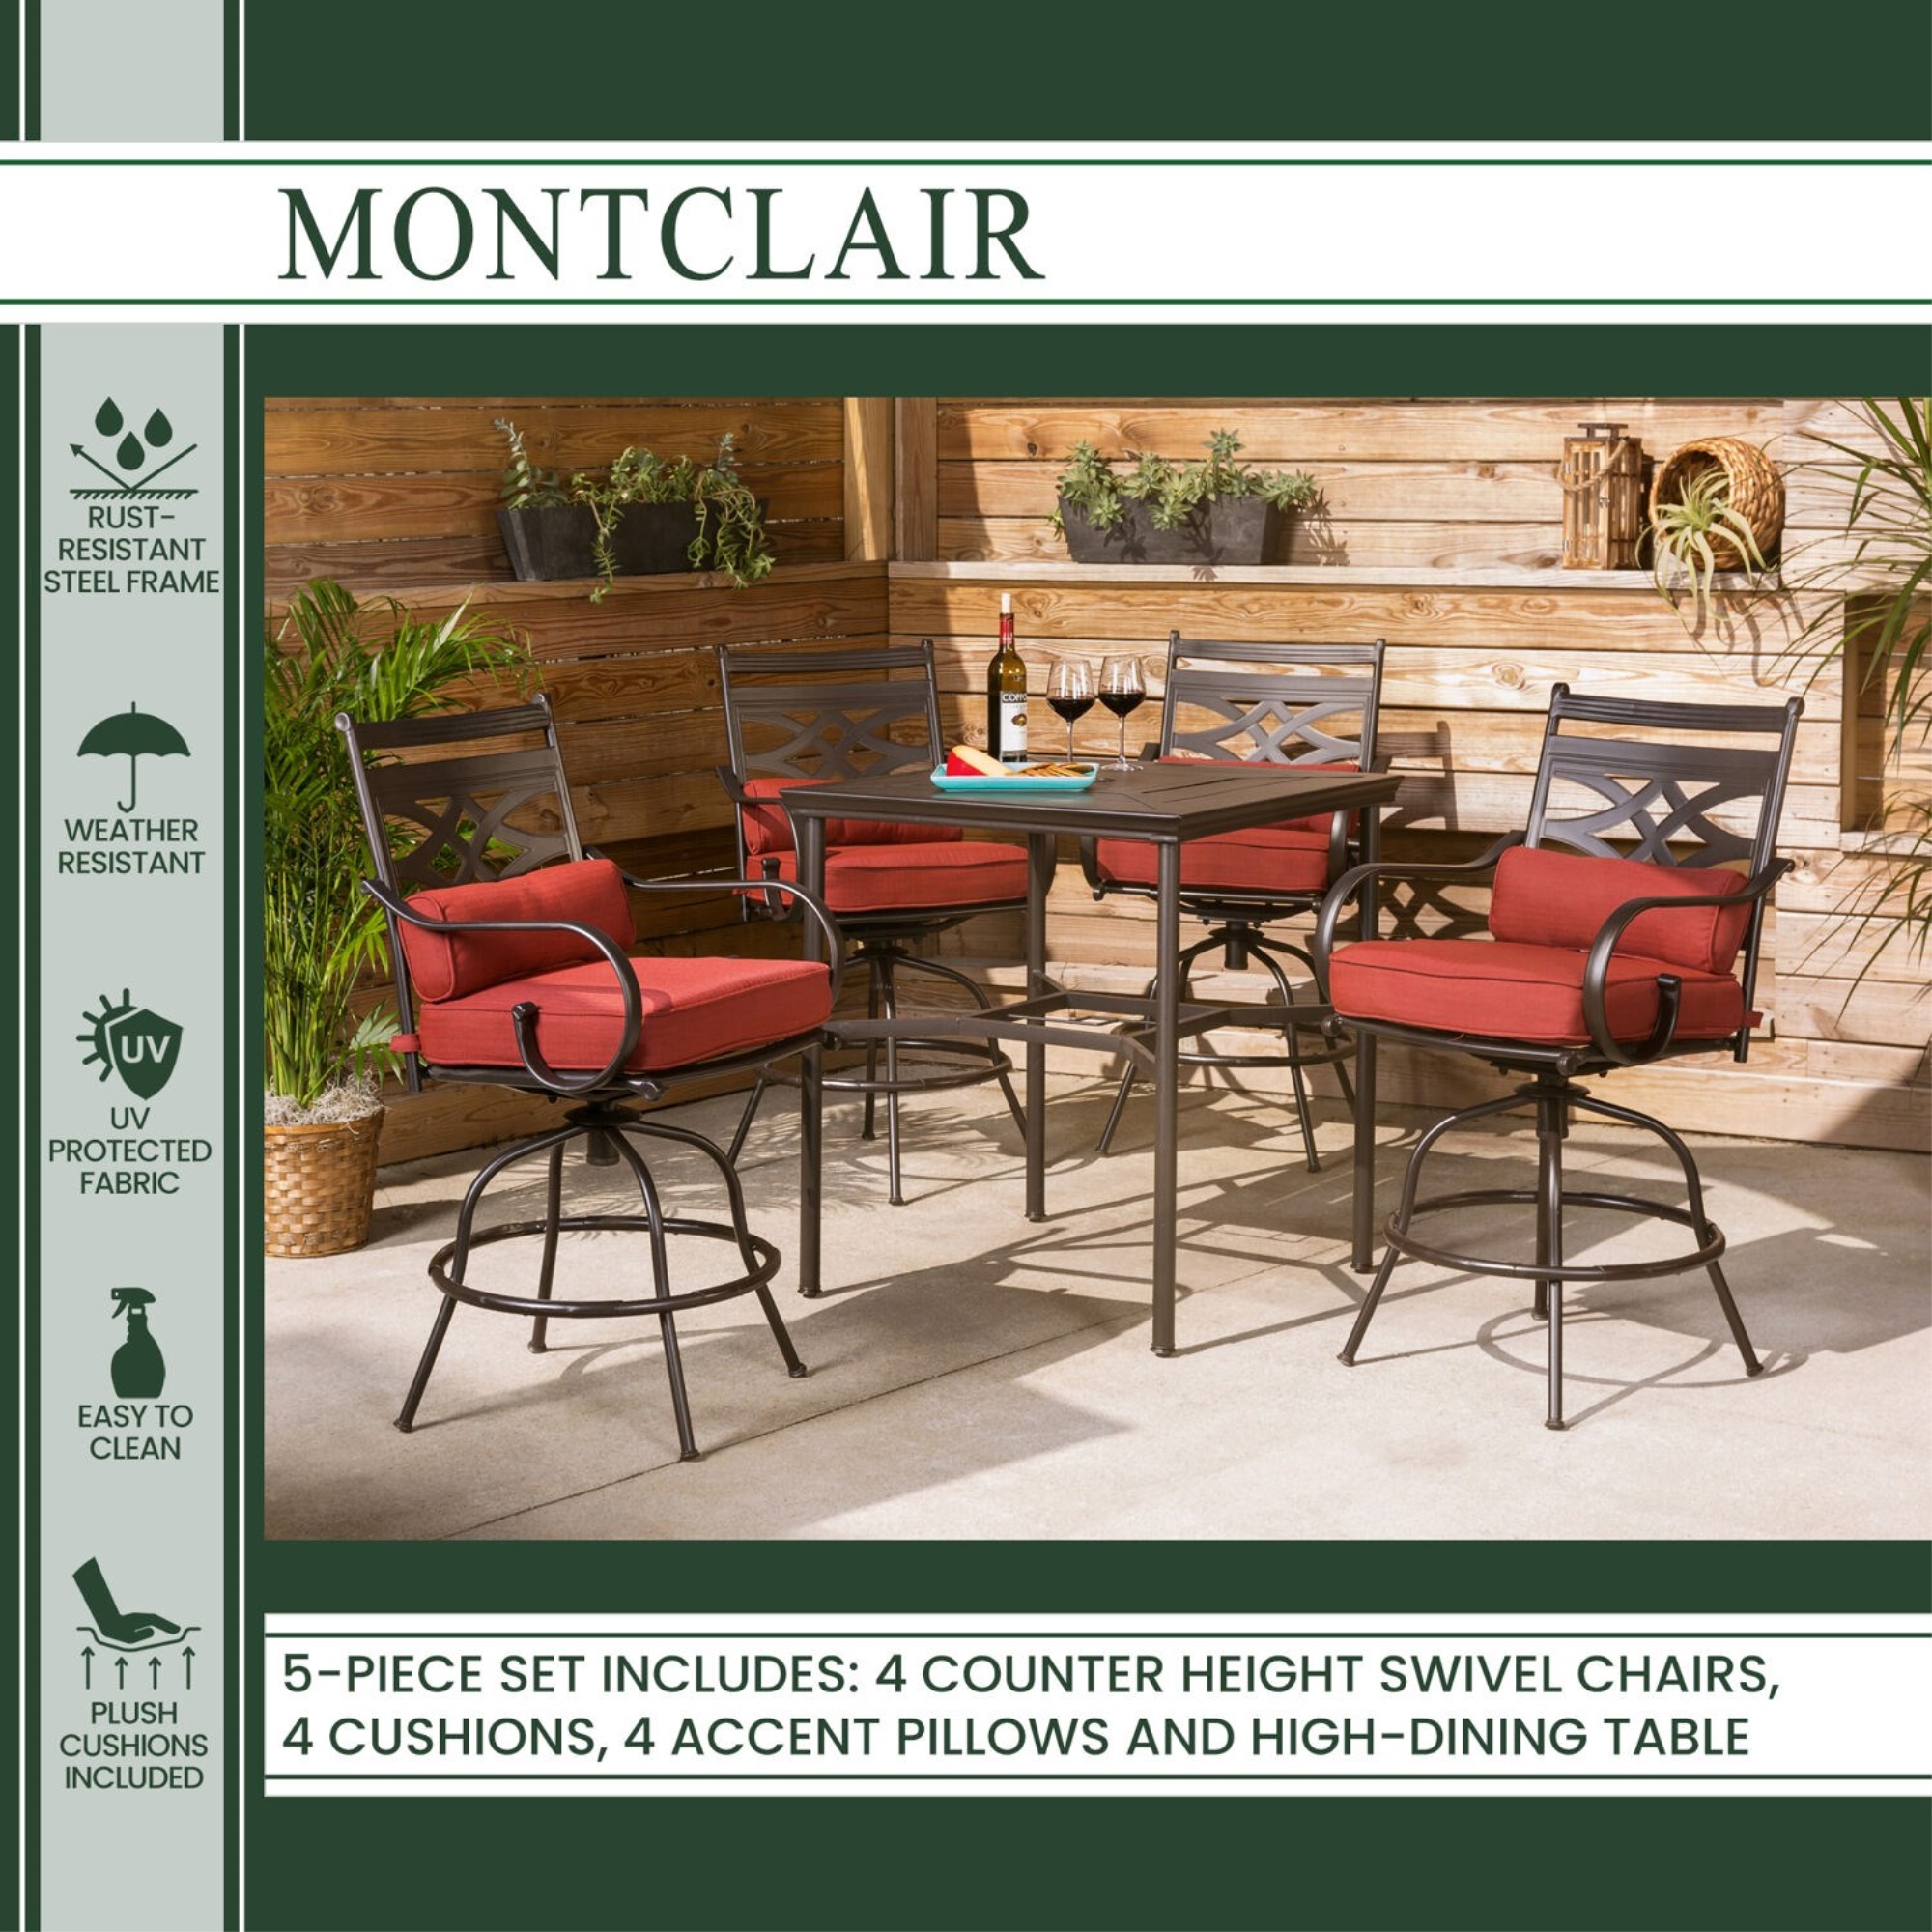 Hanover Montclair5pc High Dining: 4 Swivel Chairs, 33" Sq High Dining Table - Chili Red/Brown